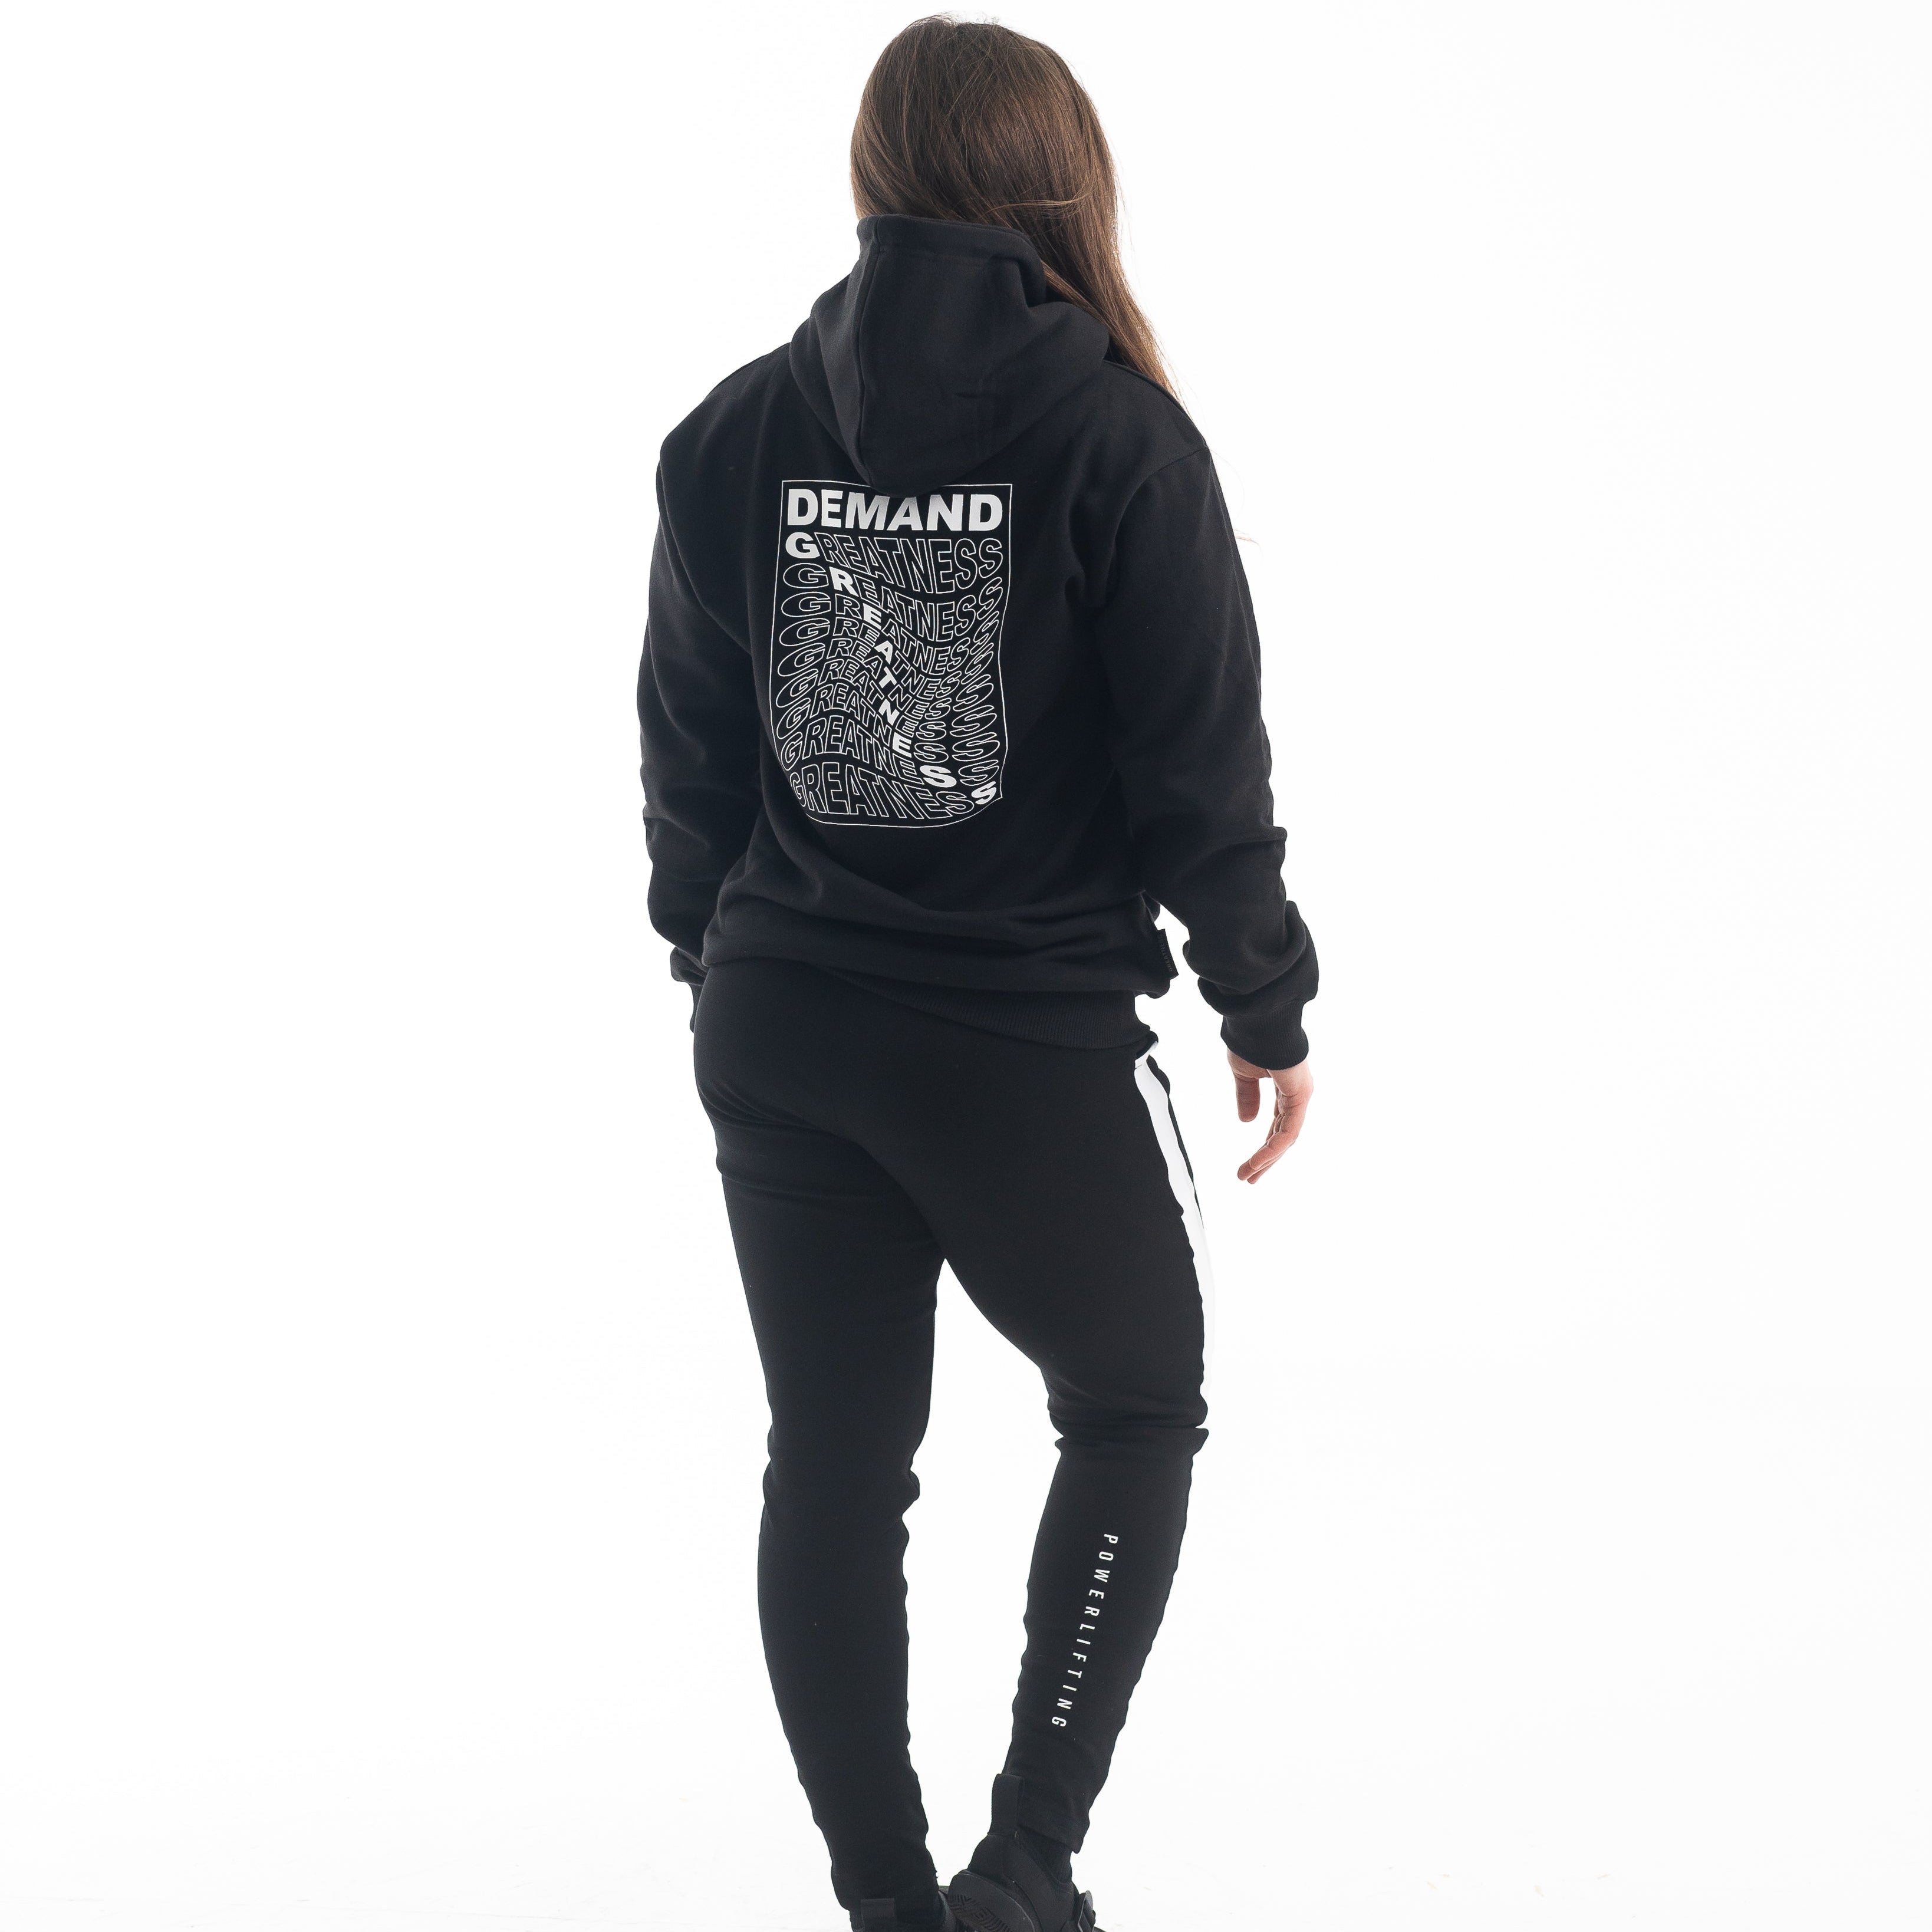 A7 Domino hoodie combines comfort and aesthetics. Purchase A7 Domino Hoodie from A7UK, shipping to UK, Norway, Swizerland, Iceland.